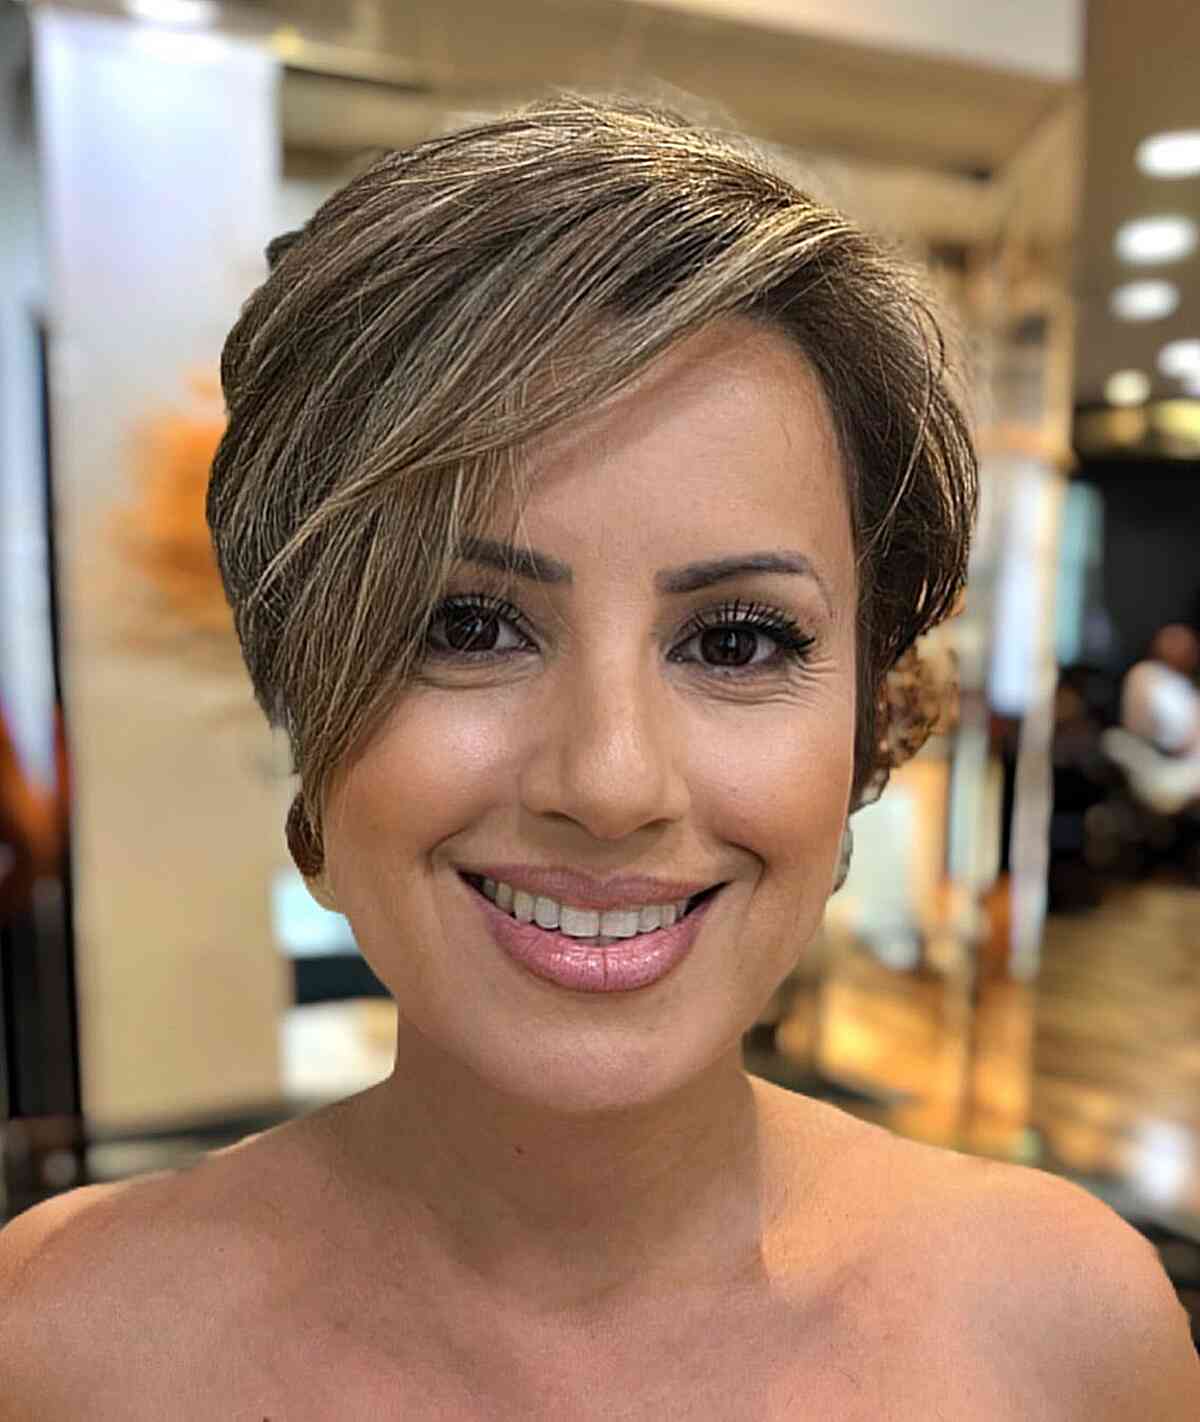 Face-Framing Fringe on a Pixie Cut with Layers and balayage